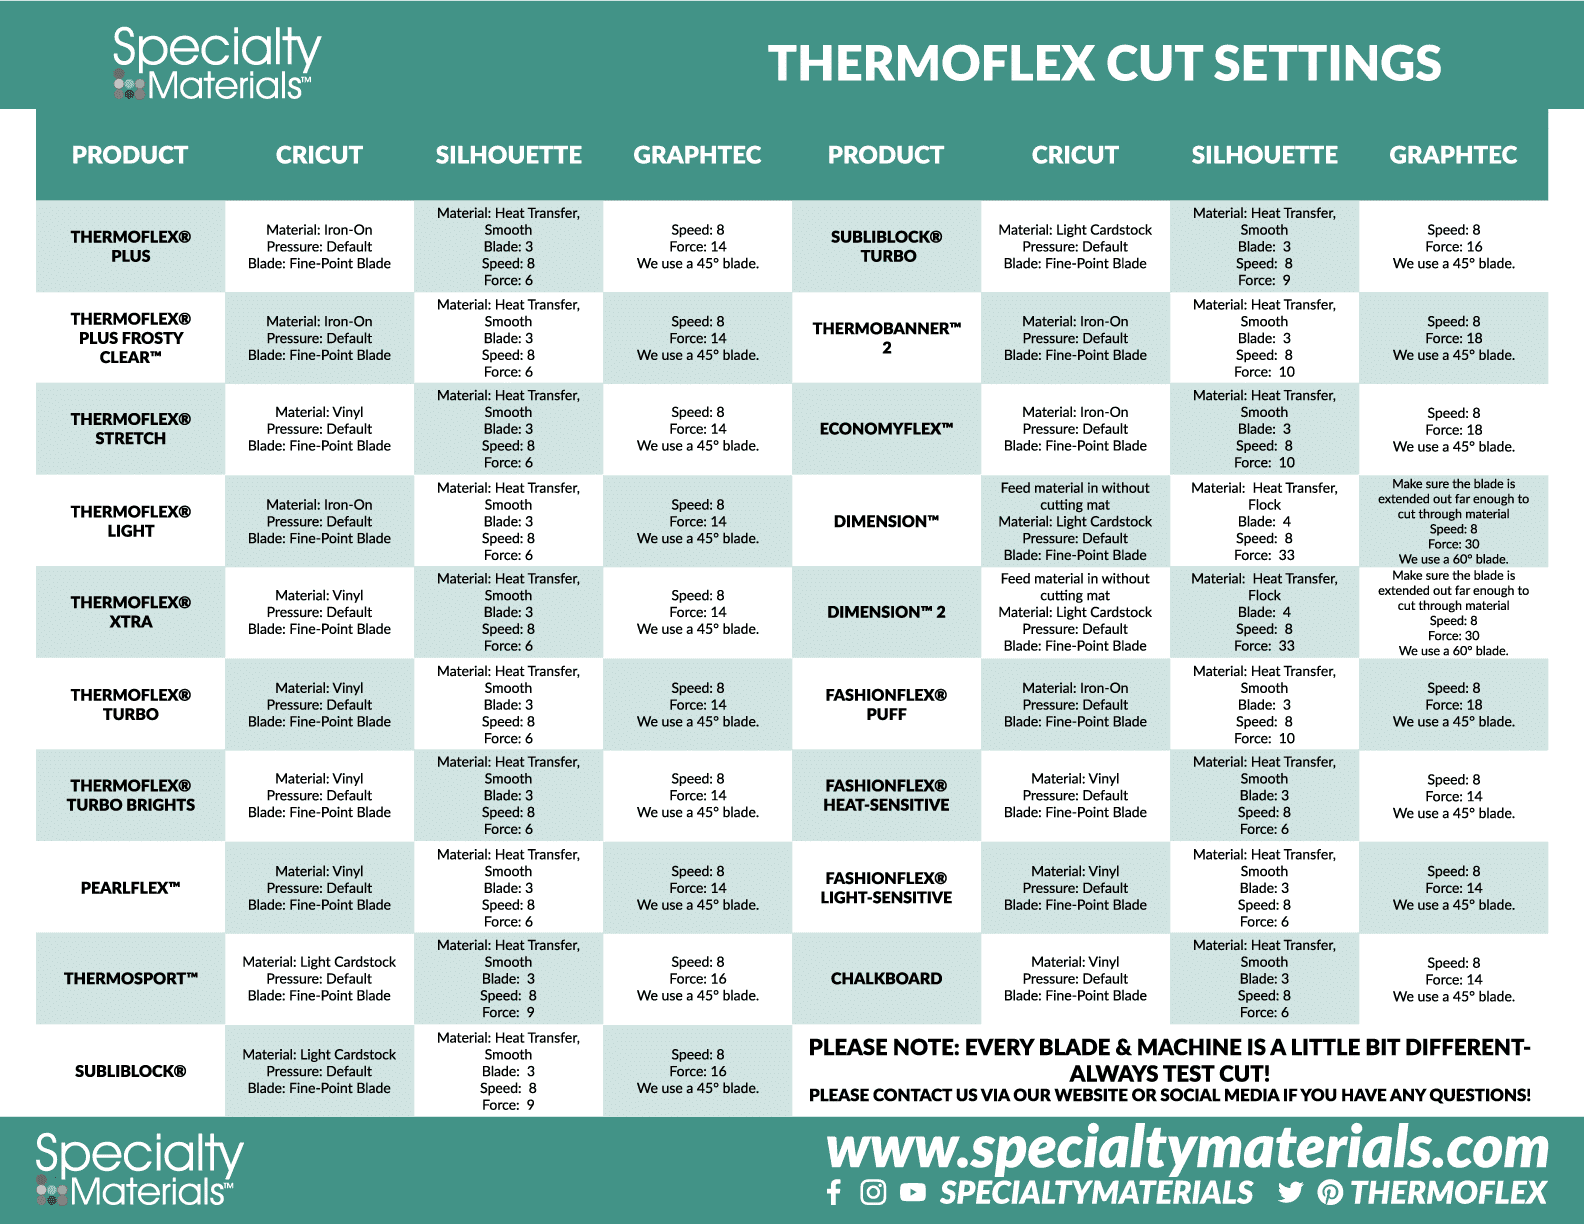 An infographic image detailing cut settings for Thermoflex materials.